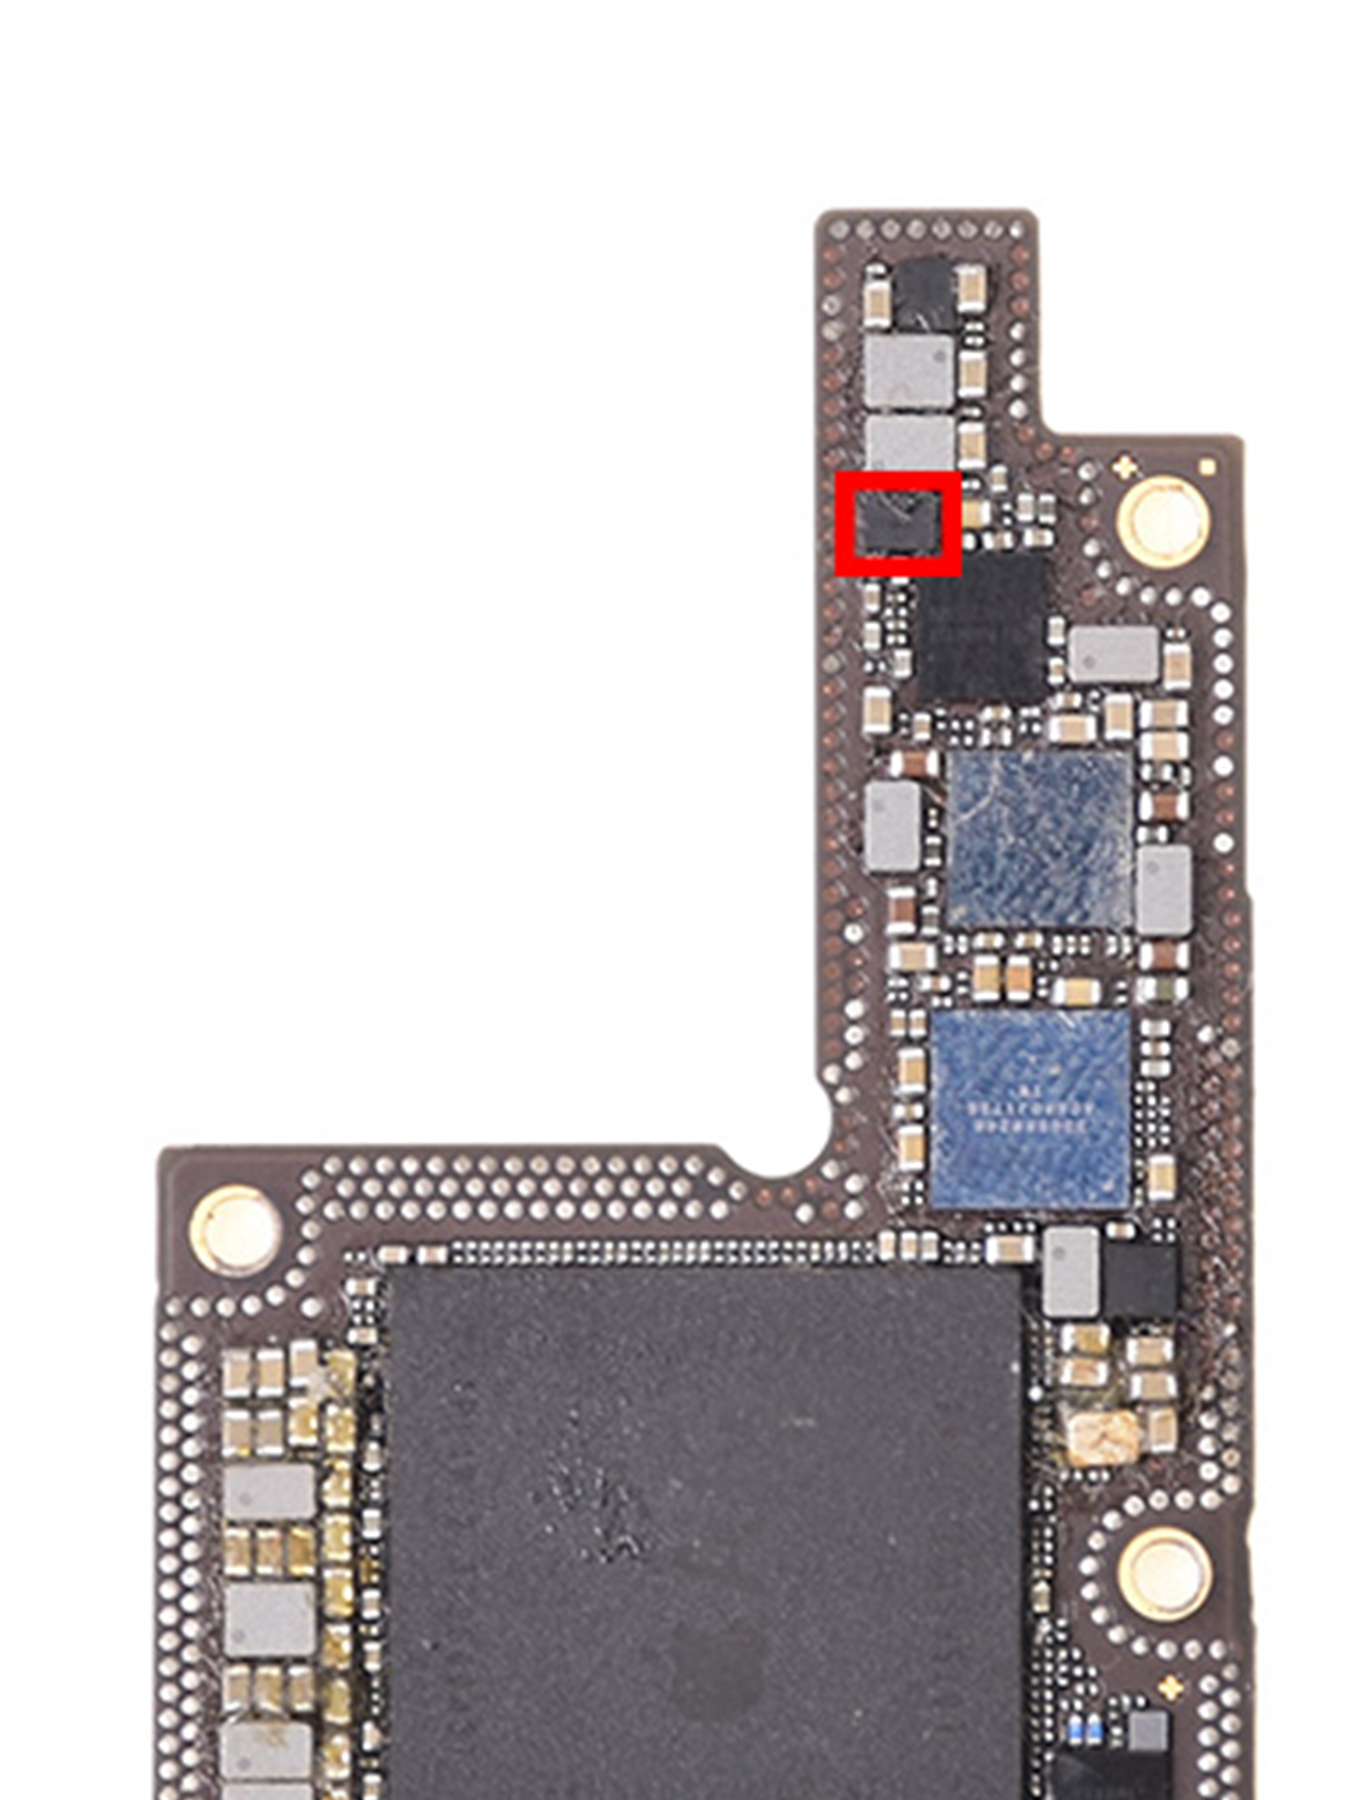 CAMERA FLASH DRIVER IC 1 COMPATIBLE WITH IPHONE X / XS / XS MAX / XR (566A0 U4100)